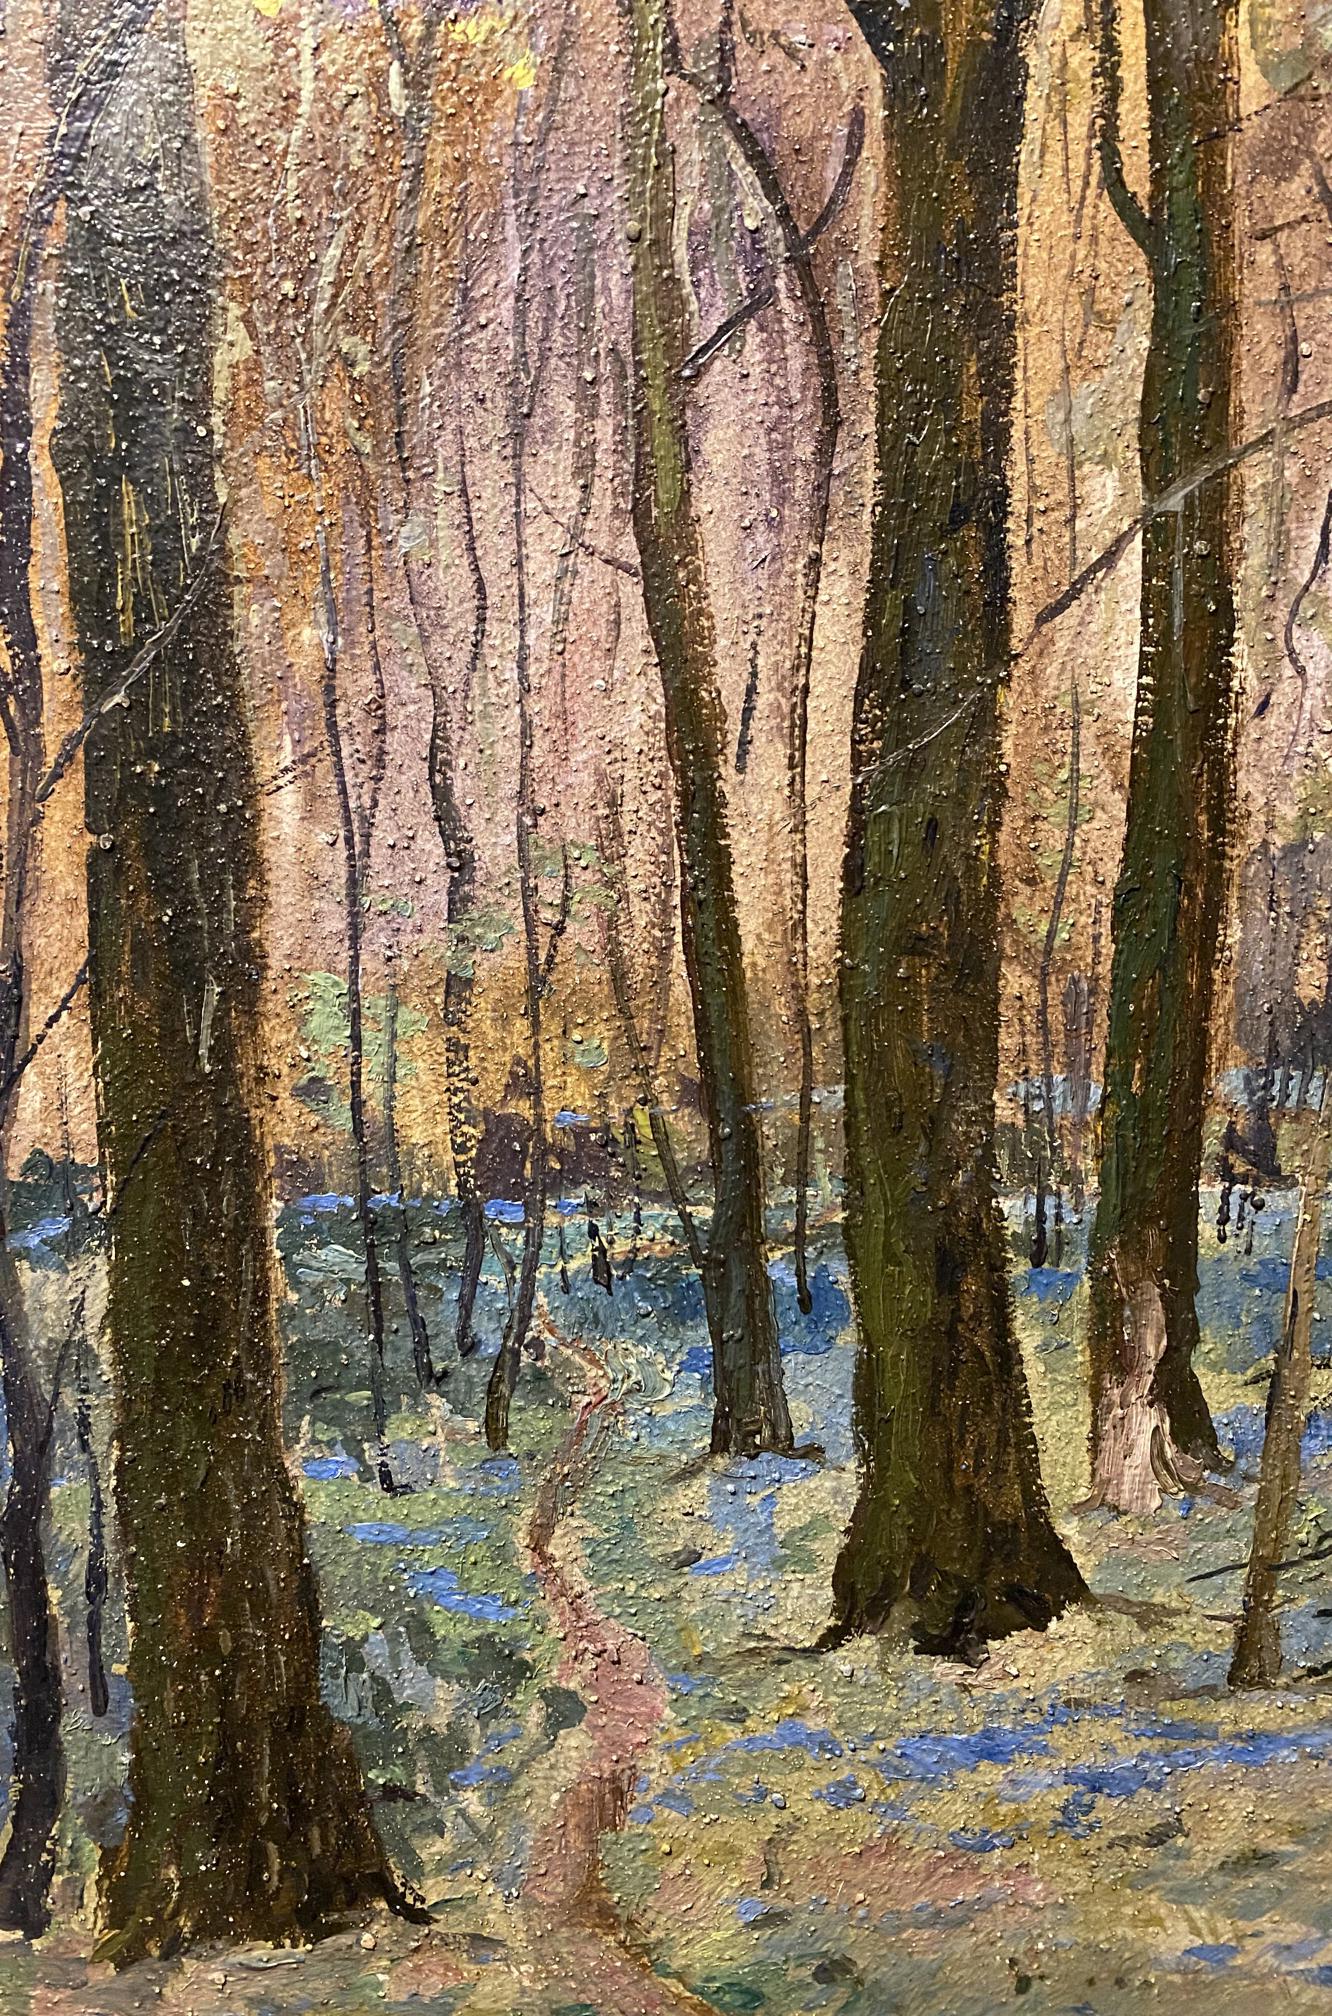 Valentin Kuts's oil painting capturing Spring in the Forest